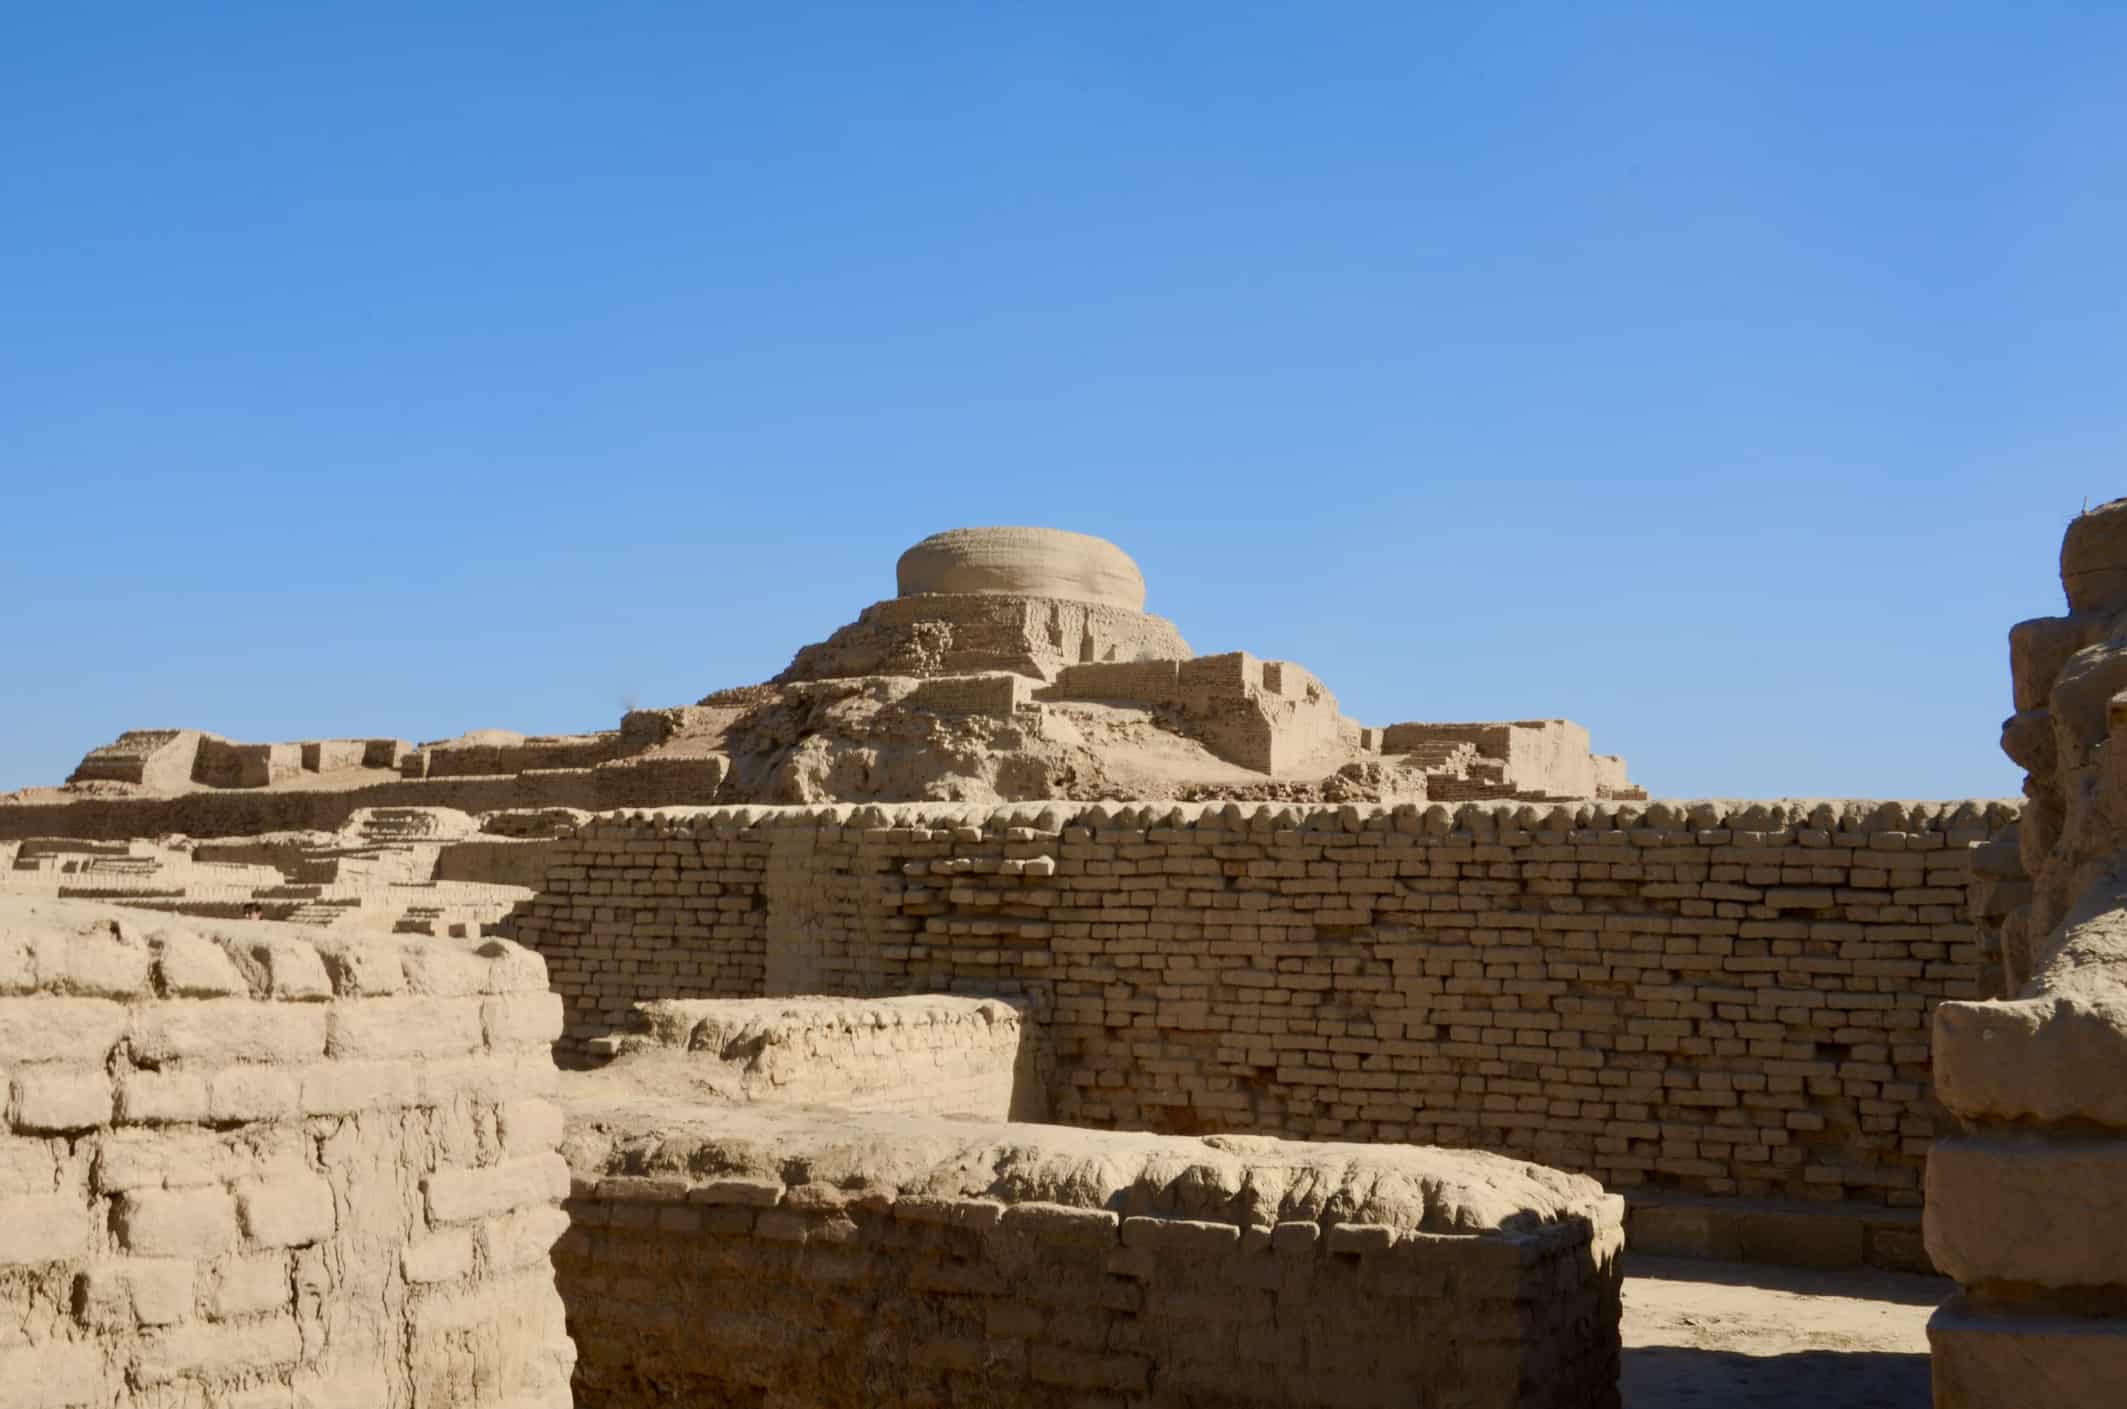 Mohenjo-daro was one of the largest settlements of the ancient Indus Valley Civilization, and one of the world's earliest major cities.